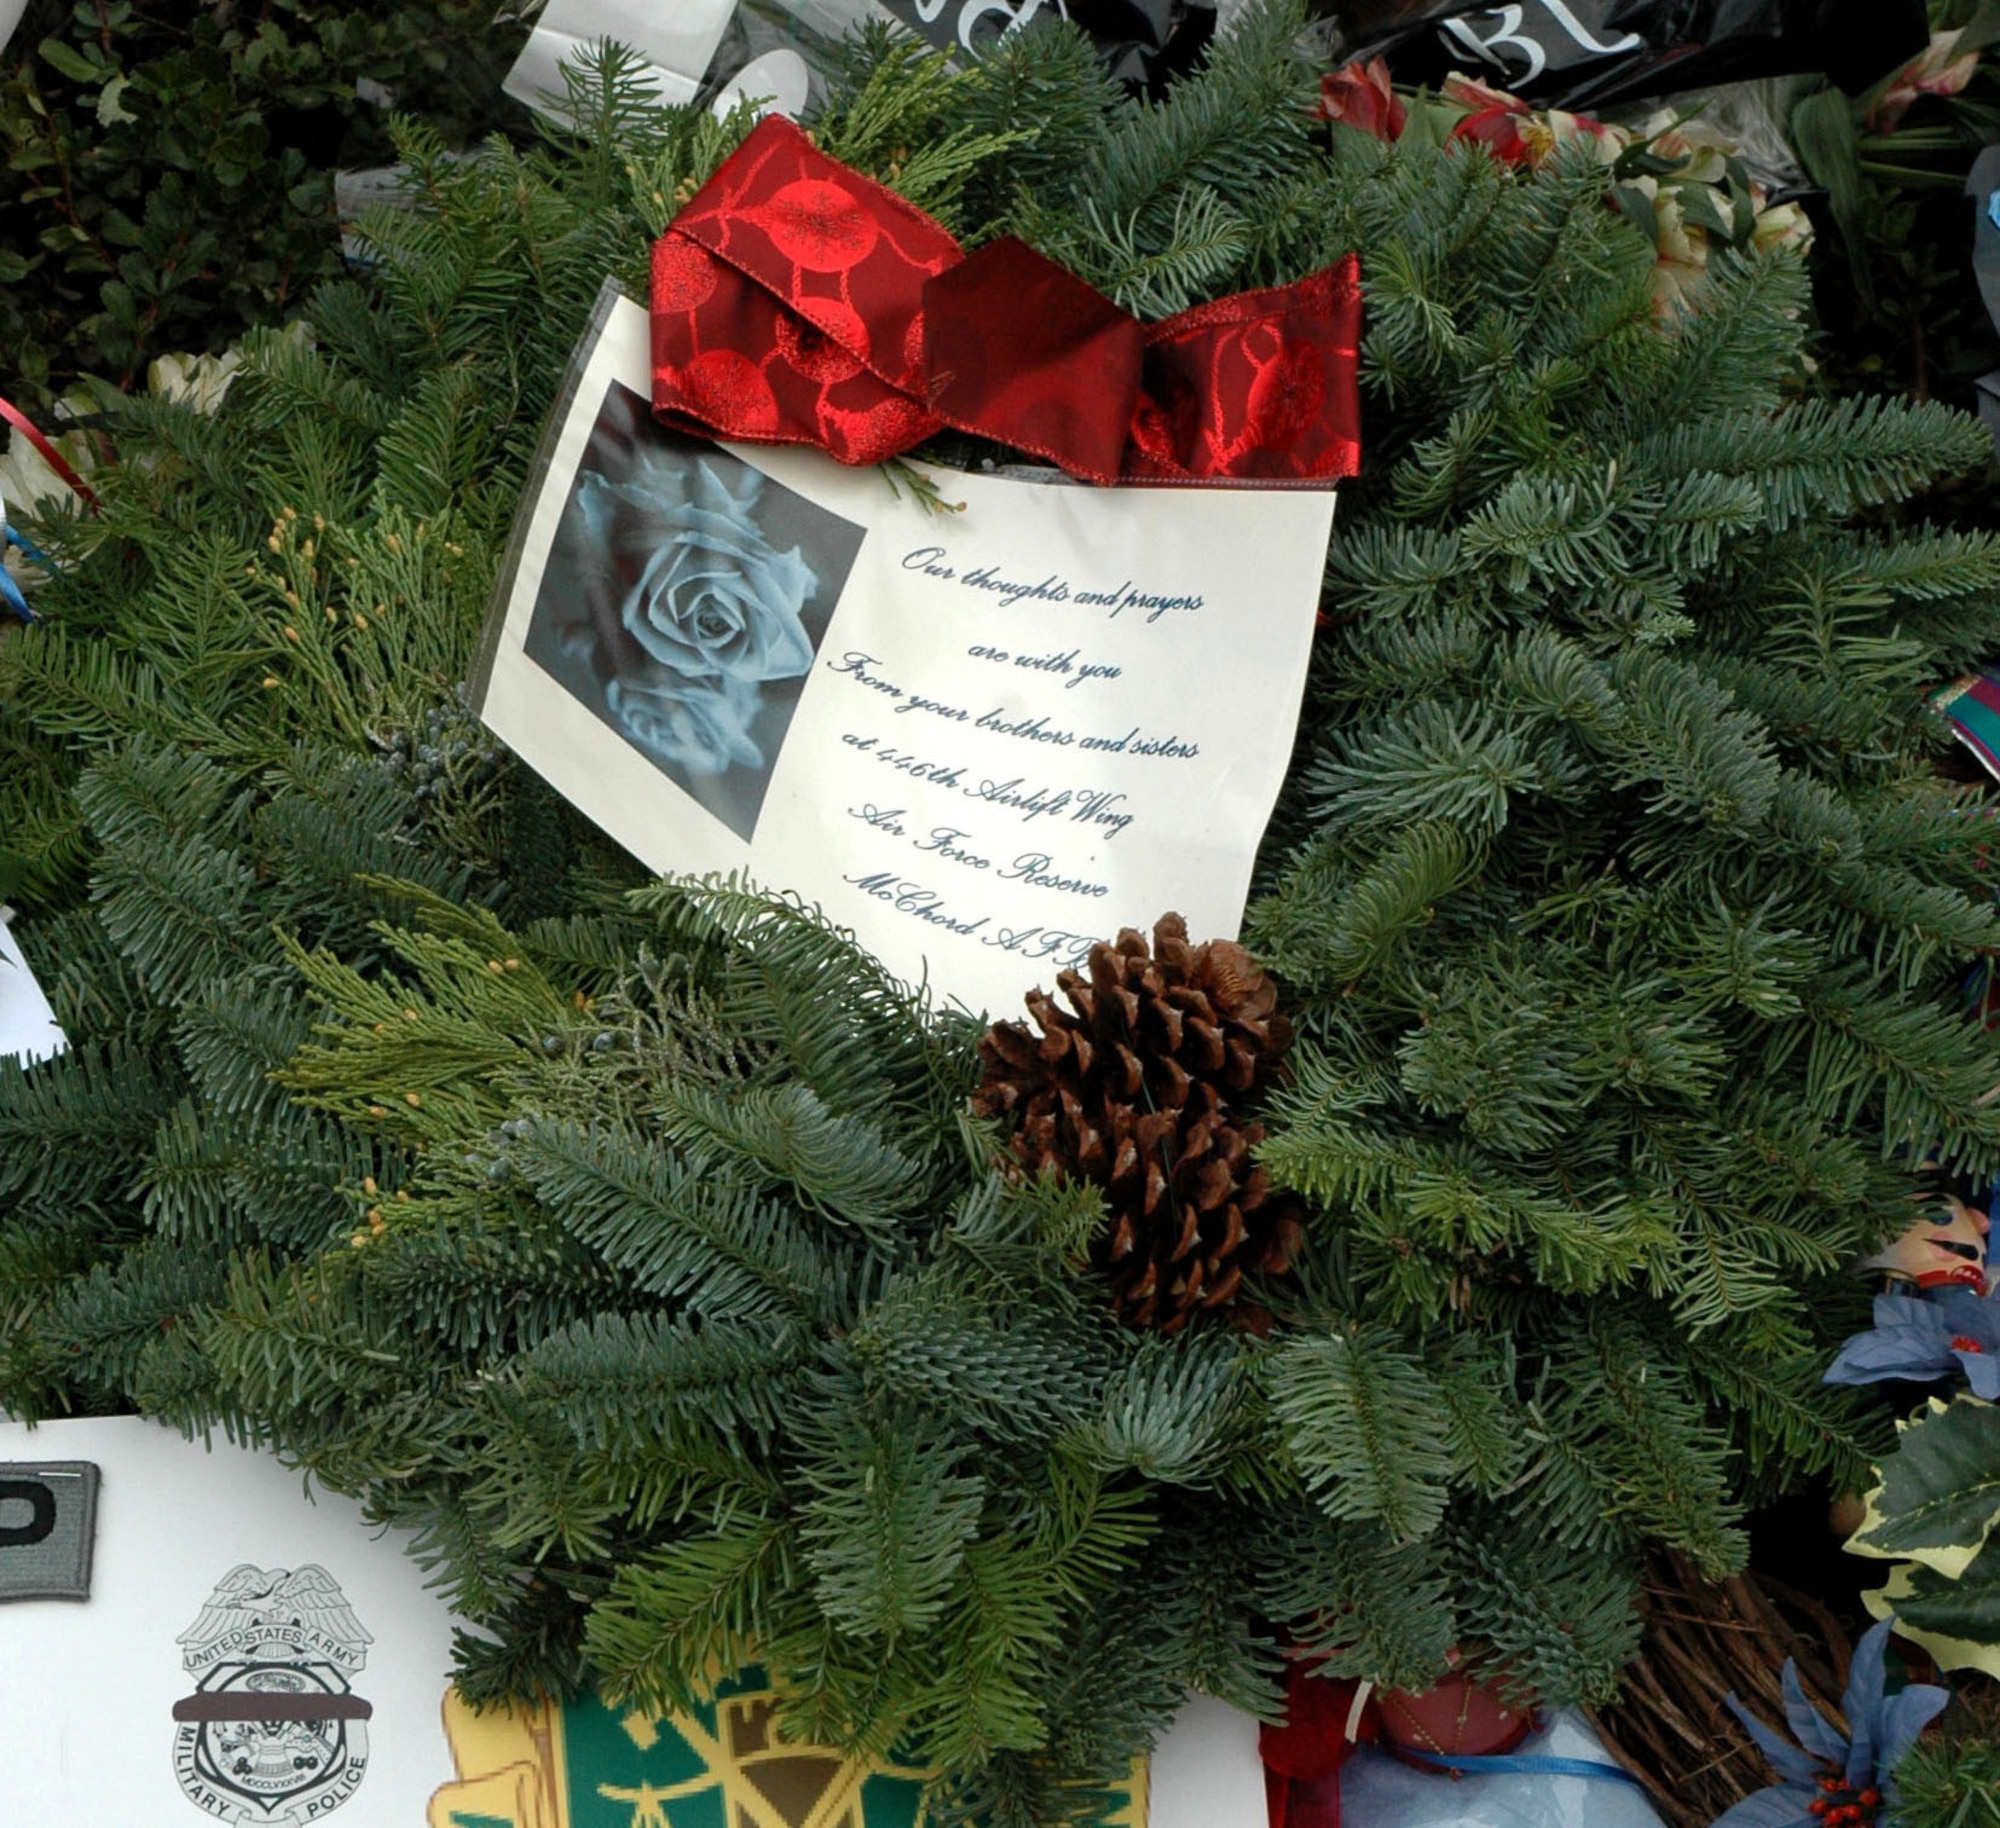 LAKEWOOD, Wash. - Reservists with the 446th Security Forces Squadron, McChord Air Force Base, Wash., left this wreath at the memorial site located at the Lakewood Police Department, Dec. 6. The group of 446th SFS police officers rendered a salute and had a moment of silence to honor their fellow police officers who were killed on Nov. 29. (U.S. Air Force photo/Staff Sgt. Nicole Celestine).